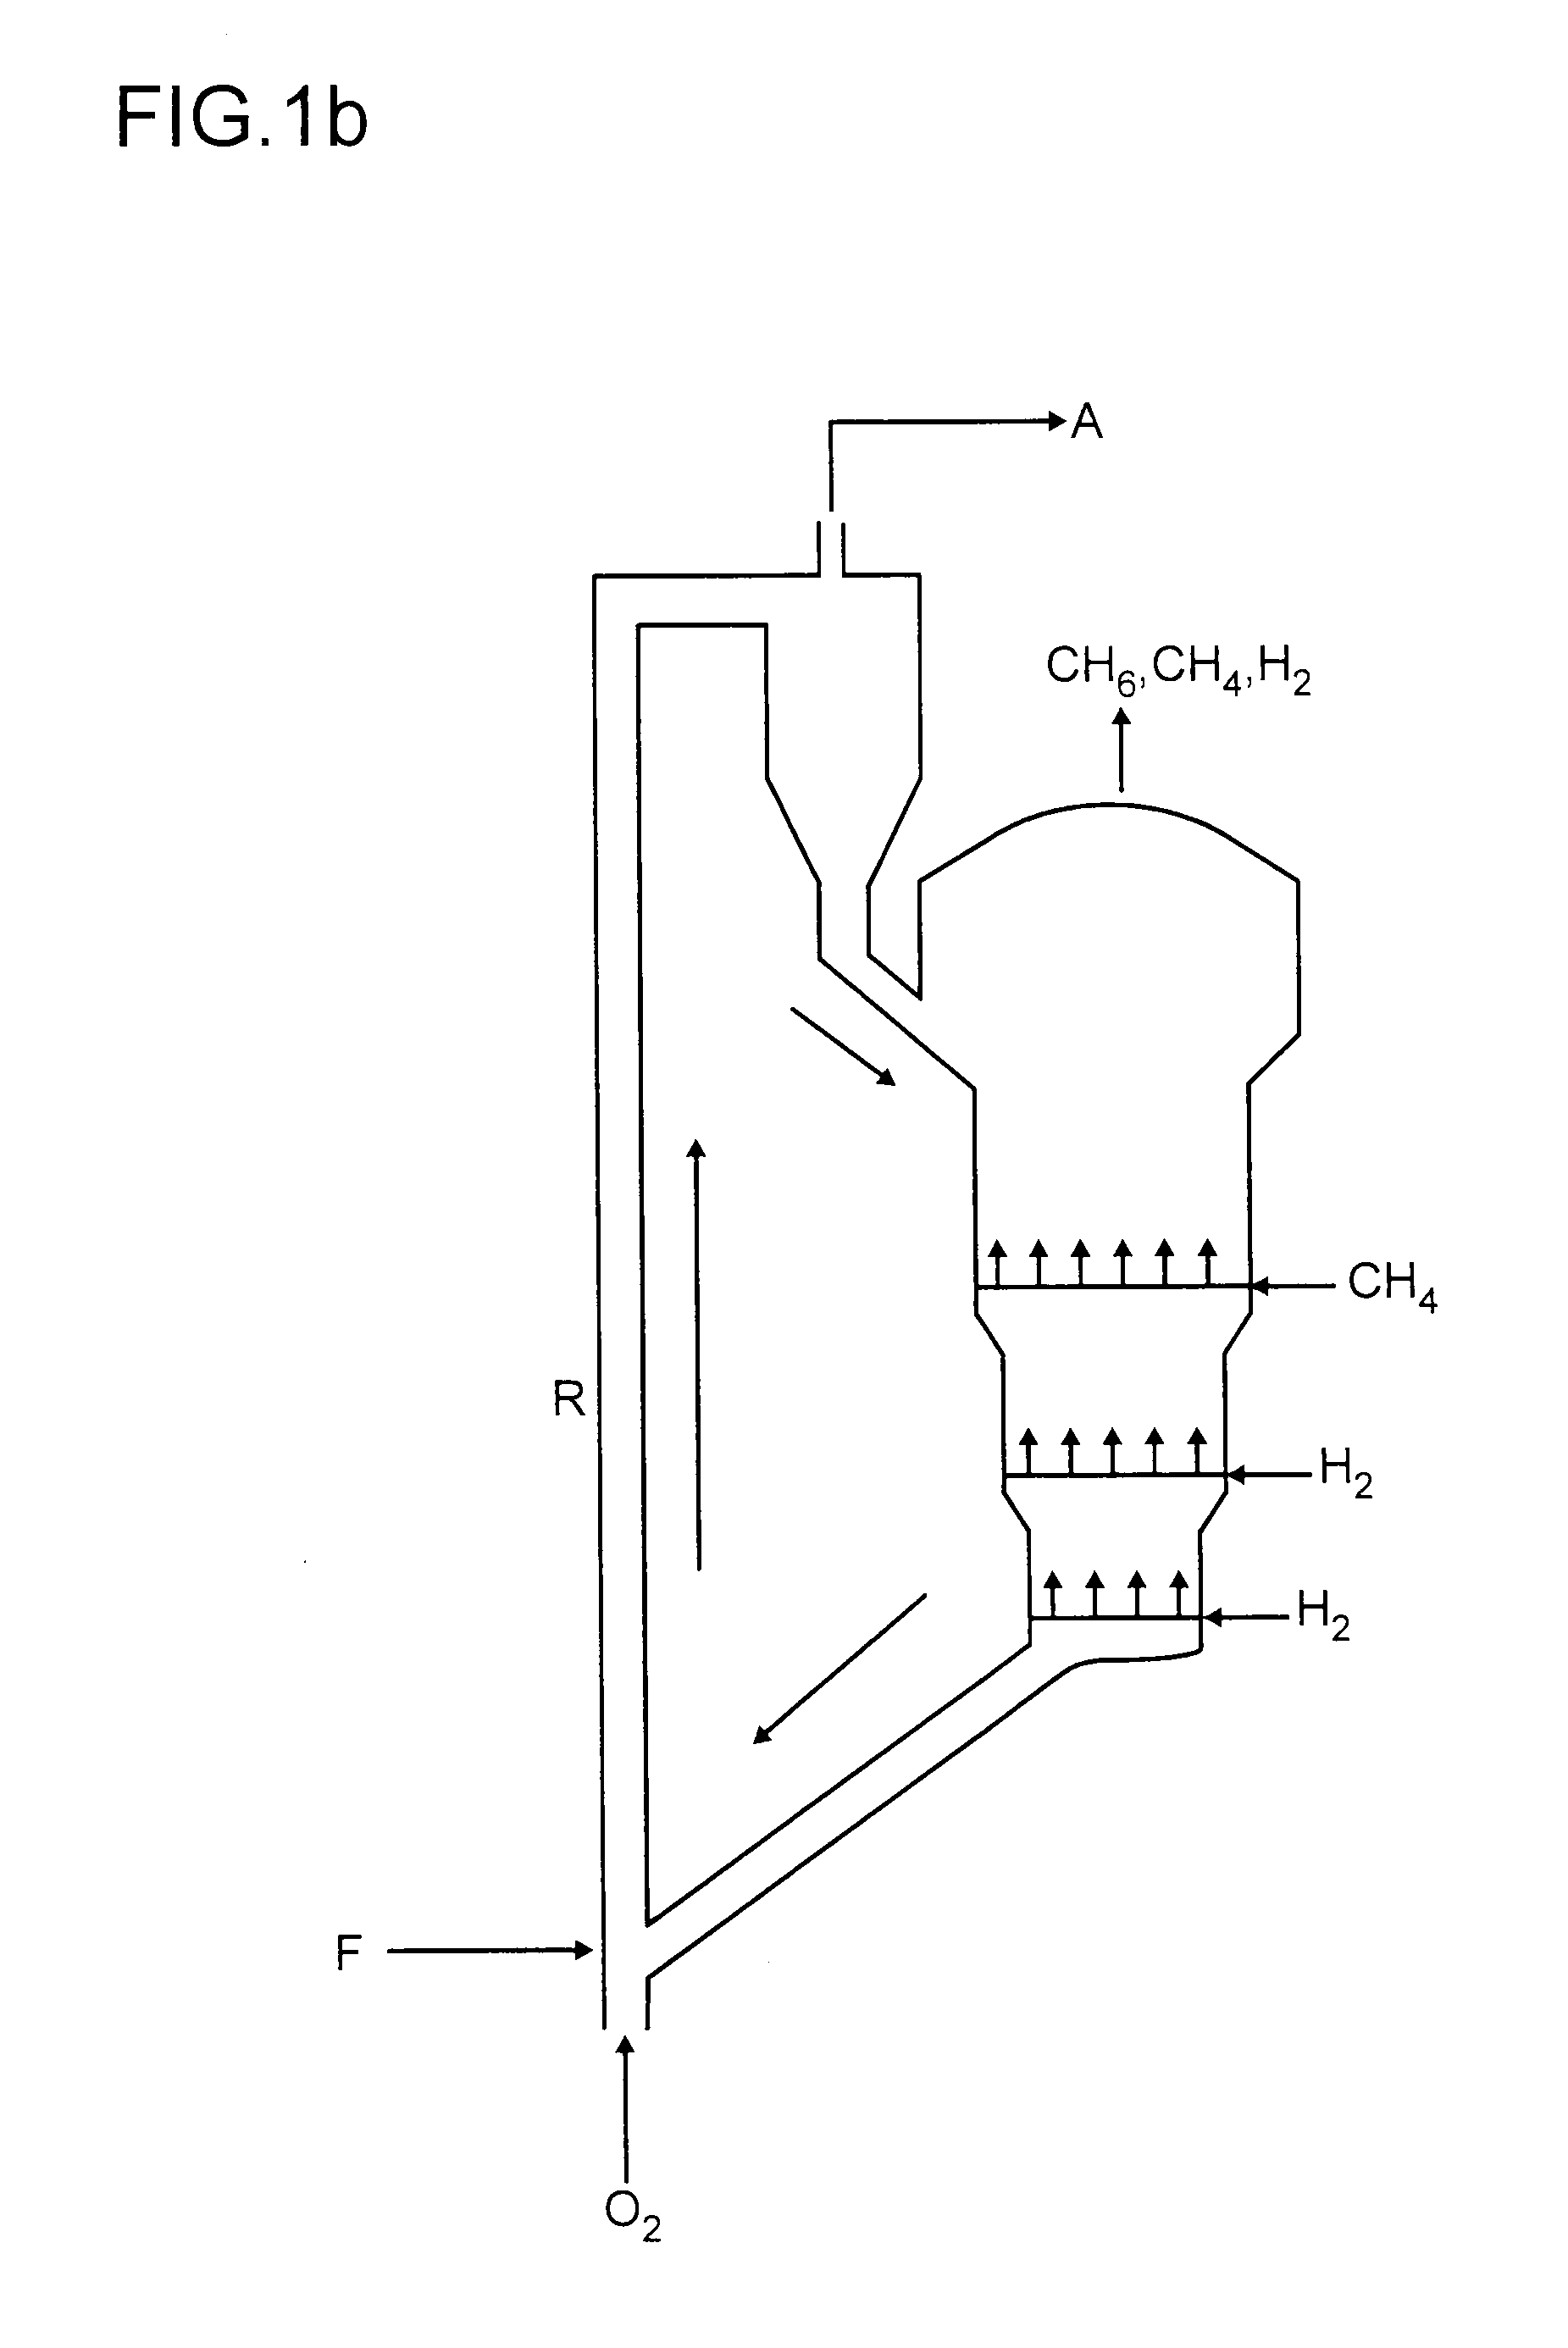 Process for preparing aromatics from methane